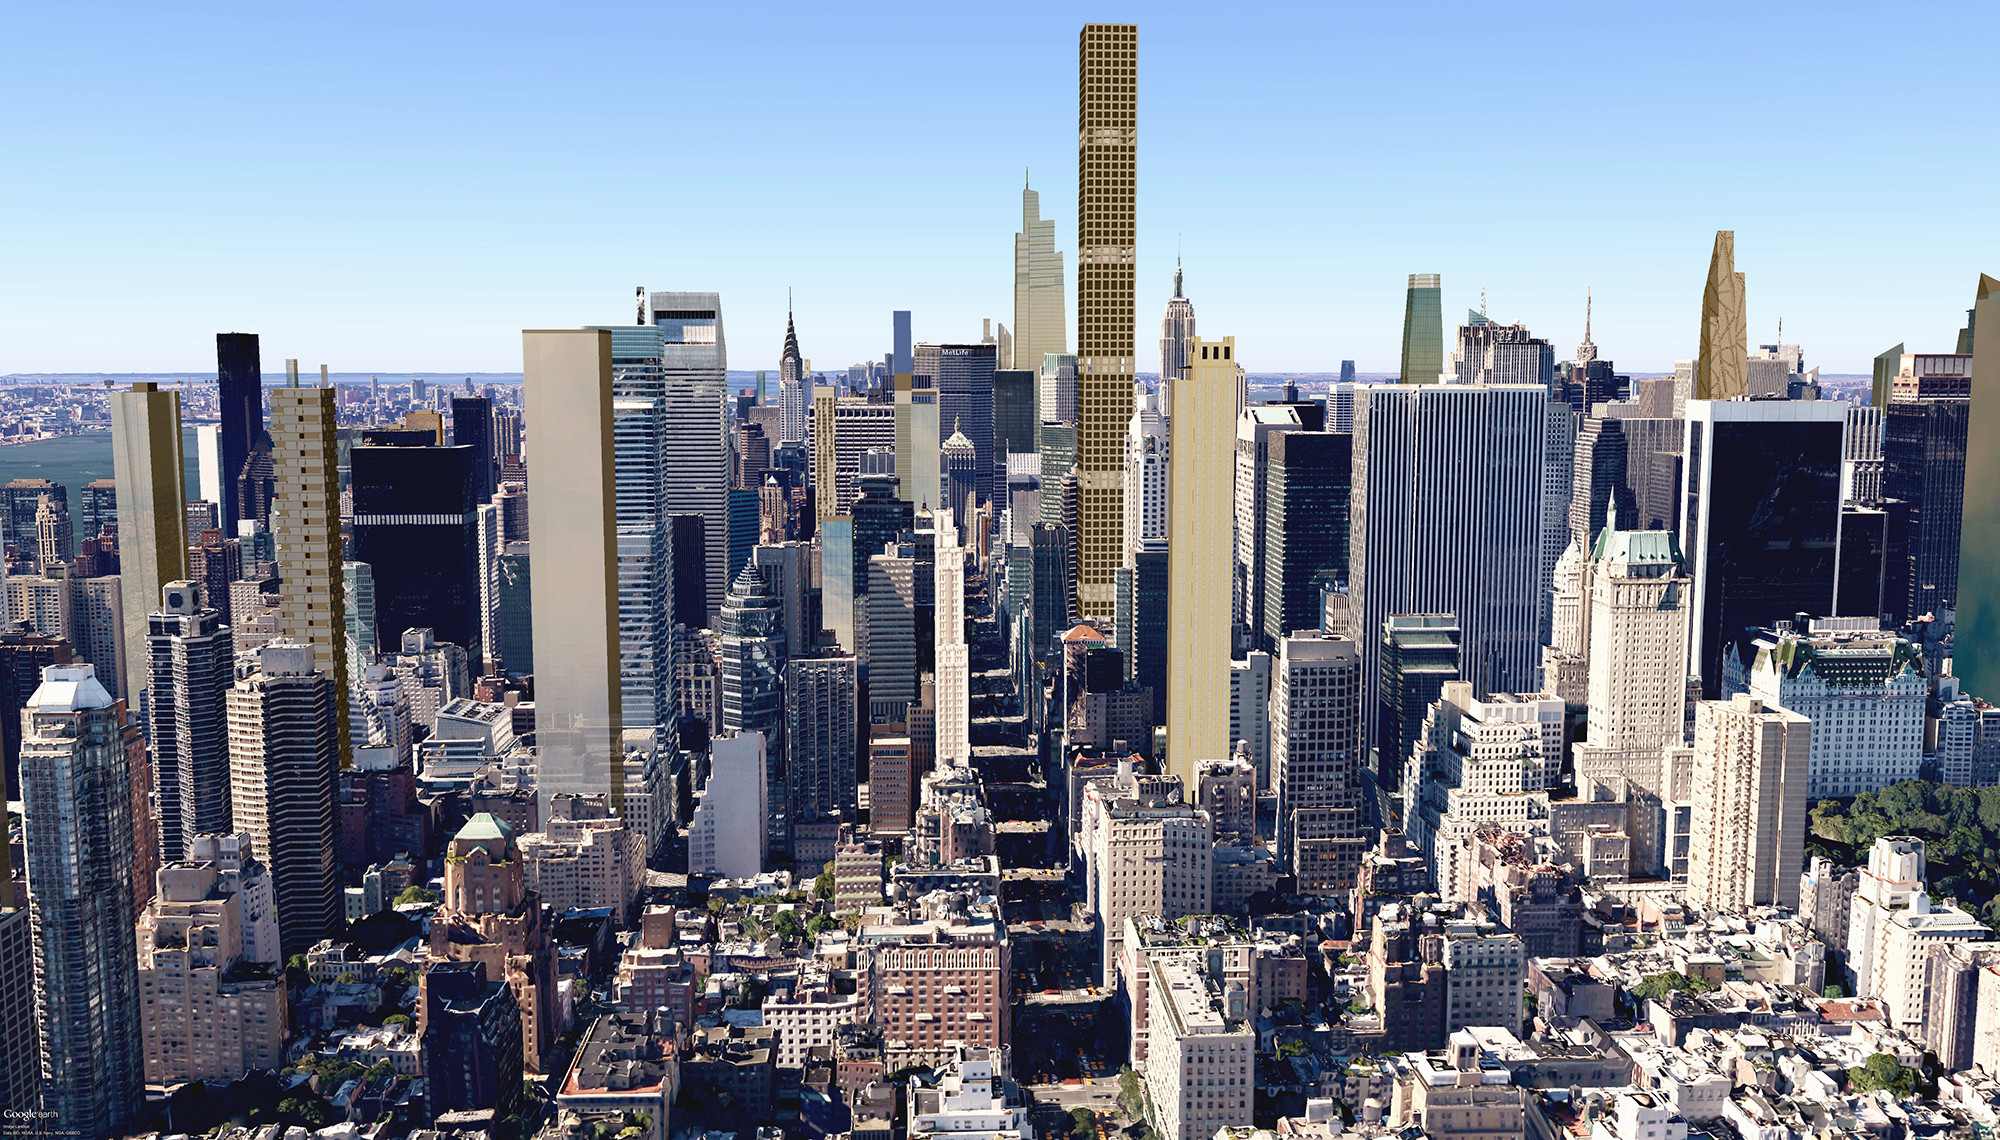 Gallery Of Check Out These Image New York S Skyline In